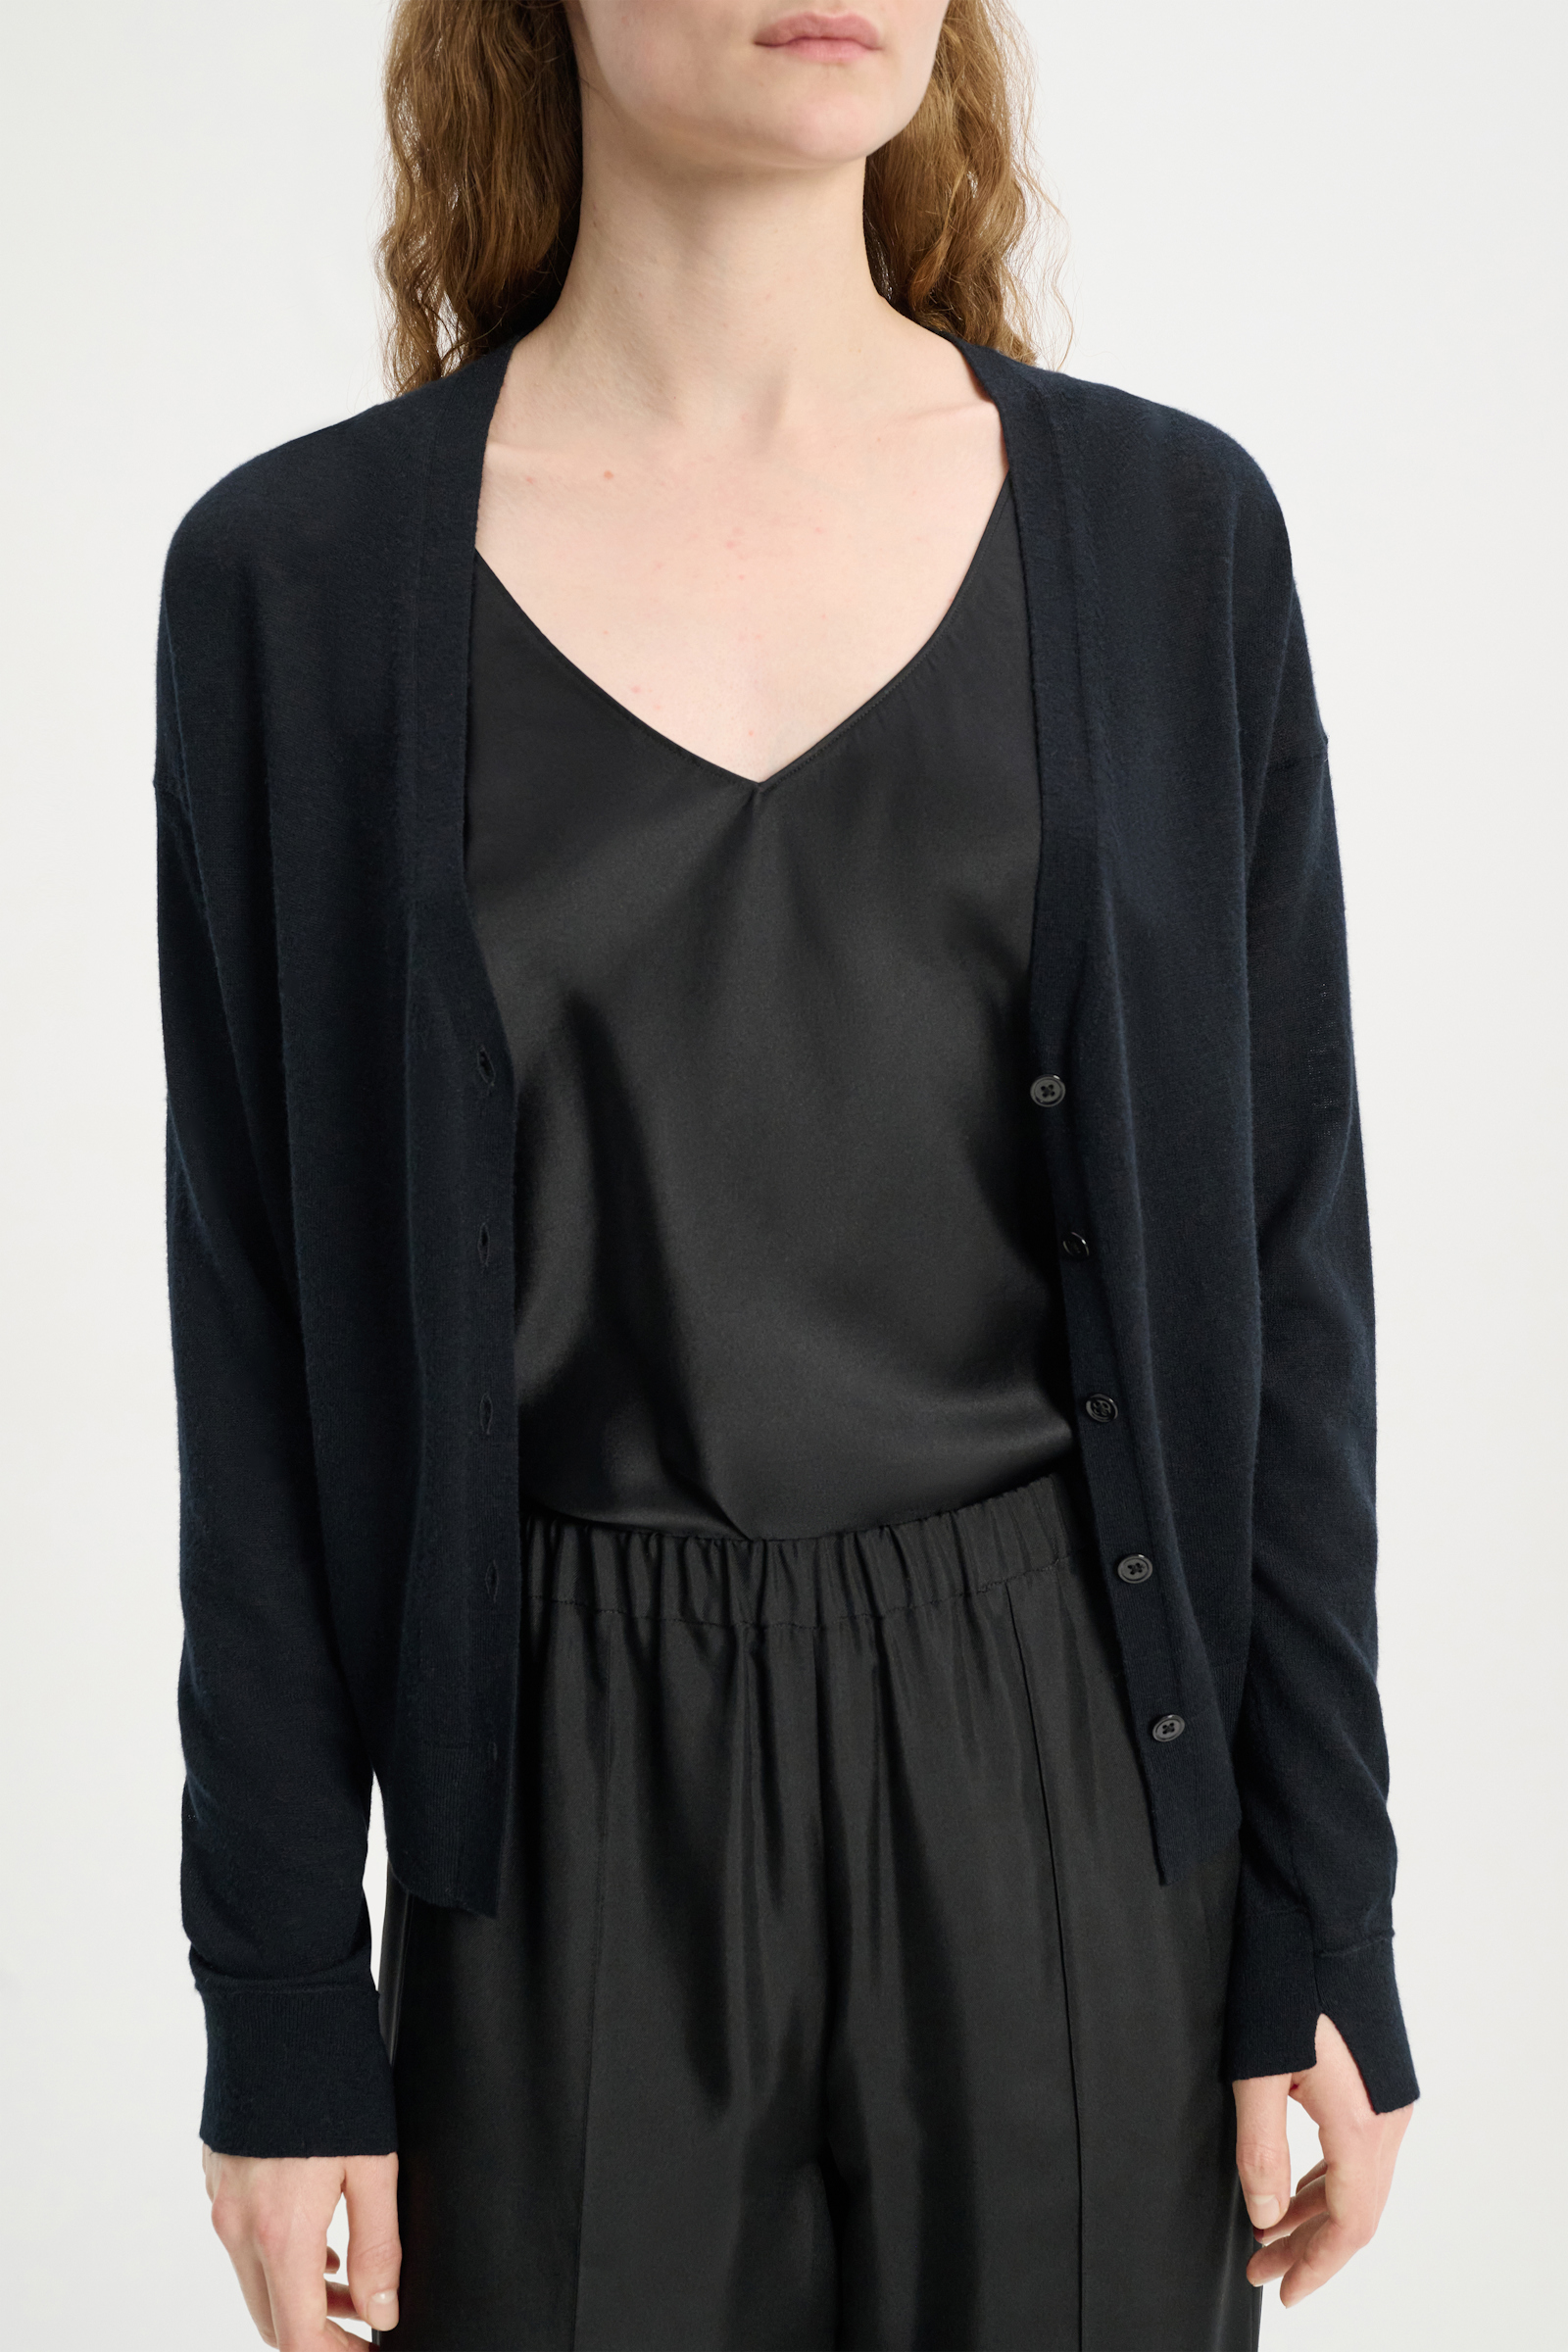 Dorothee Schumacher Wool-cashmere cardigan with tapered hem pure black